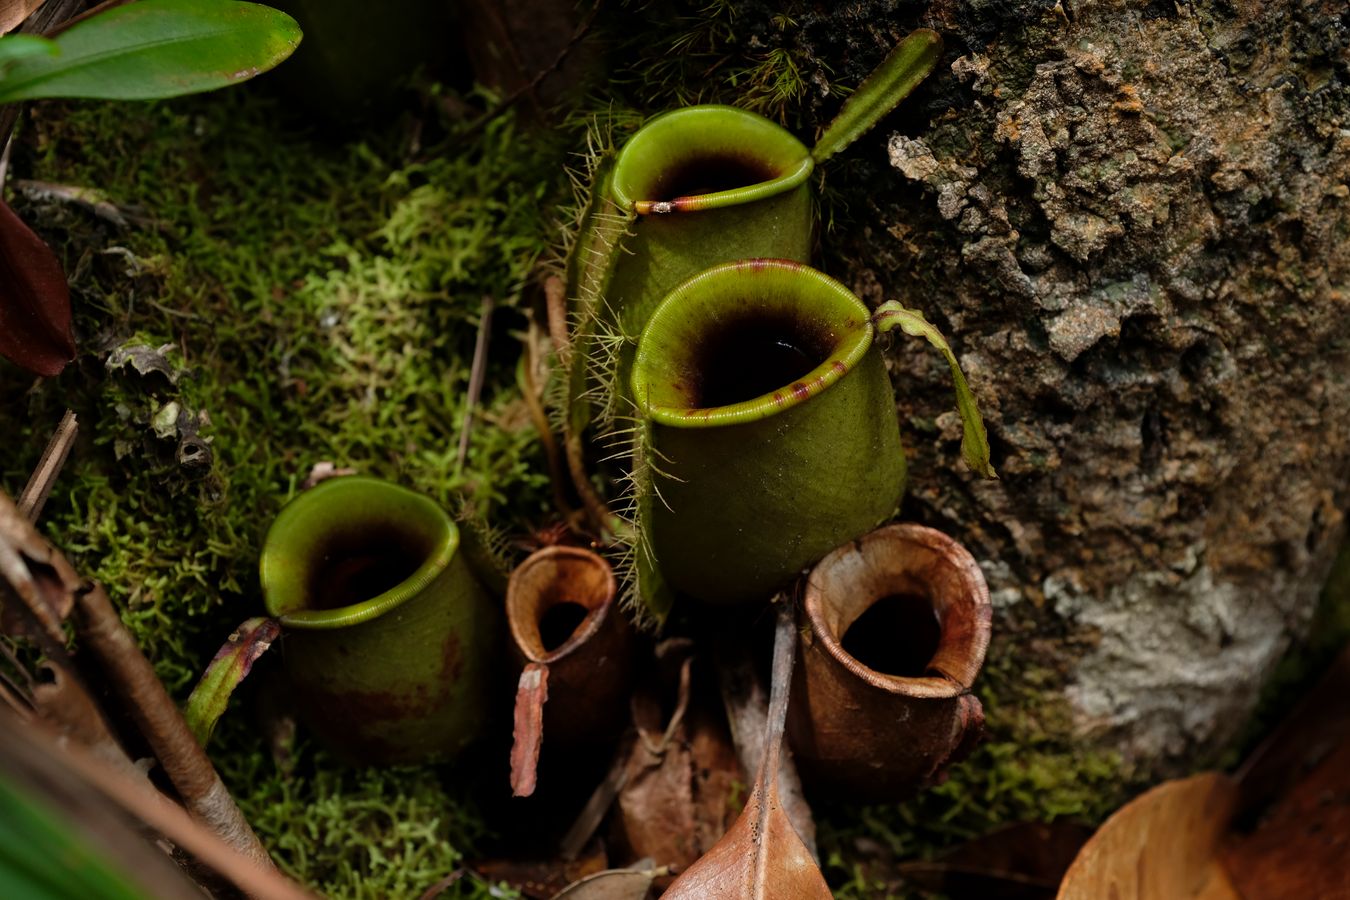 Flask-Shaped Pitcher Plant { Nepenthes Ampullaria }